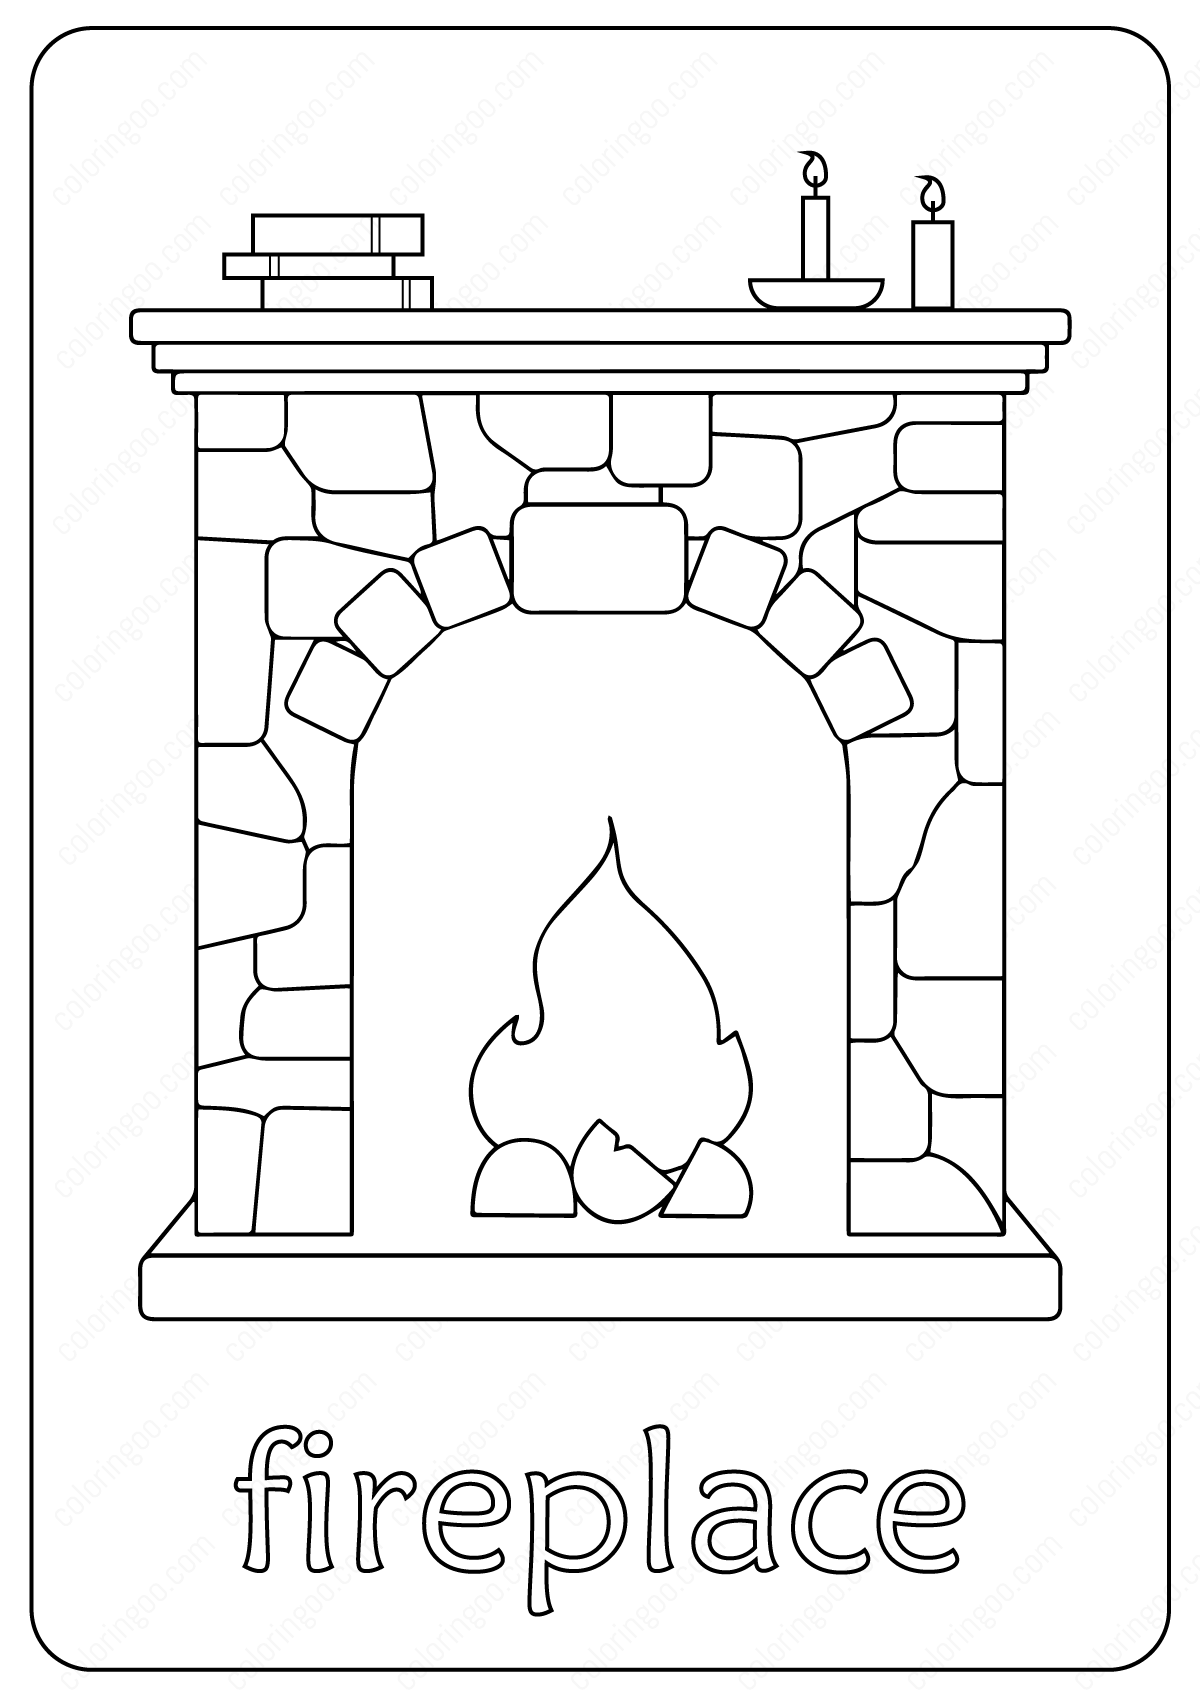 fireplace coloring pages